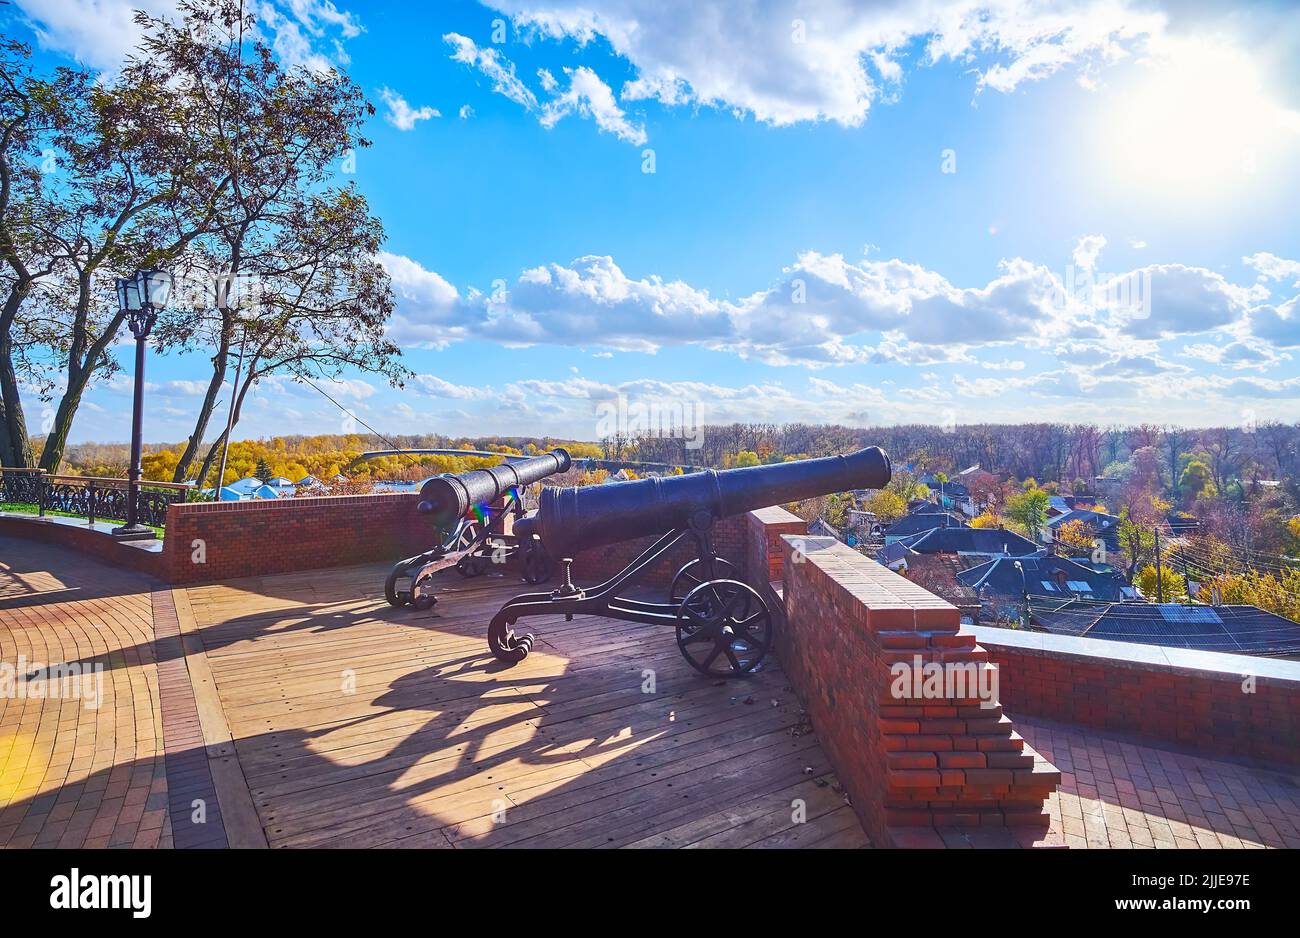 The sunny day in Chernihiv Dytynets citadel with a view on vintage cannons at the brick rampart, Chernihiv, Ukraine Stock Photo